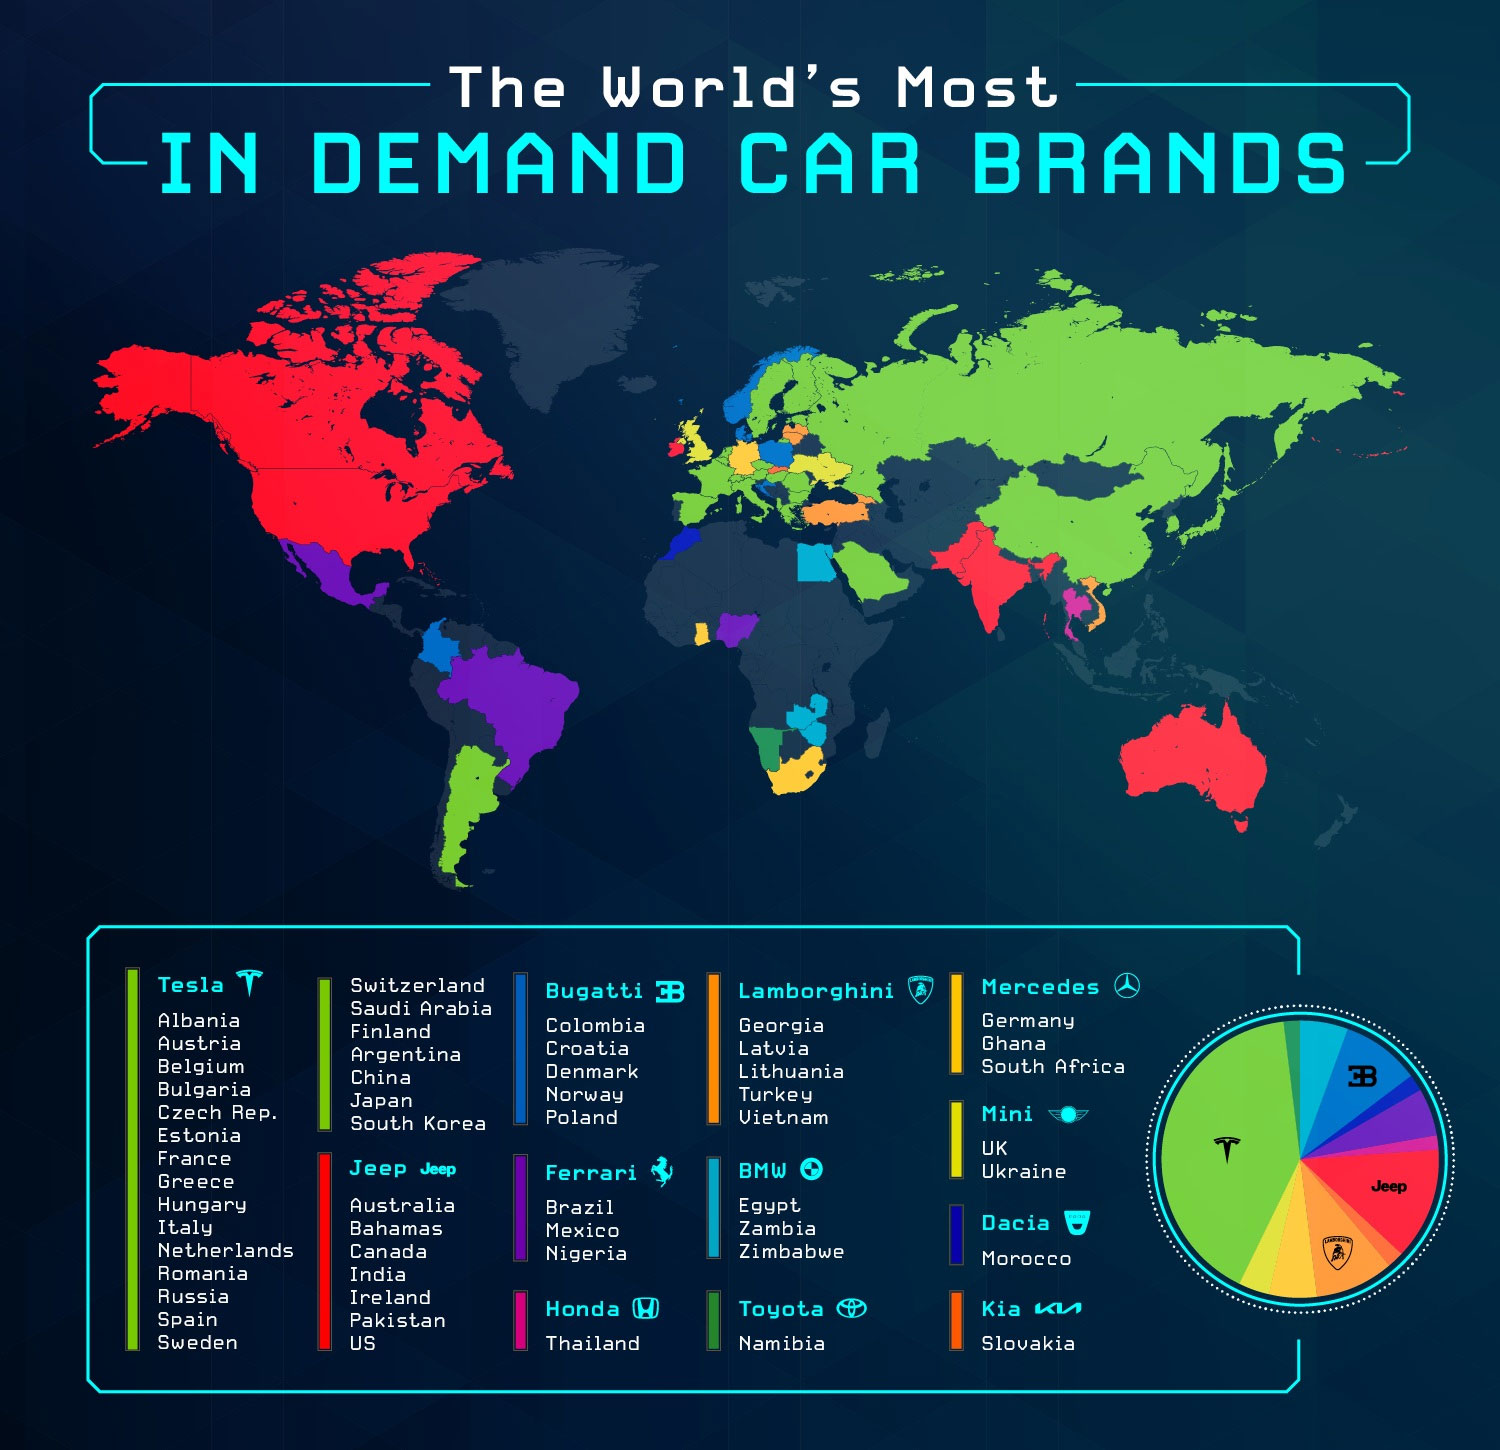 The World's Most In Demand Car Brands